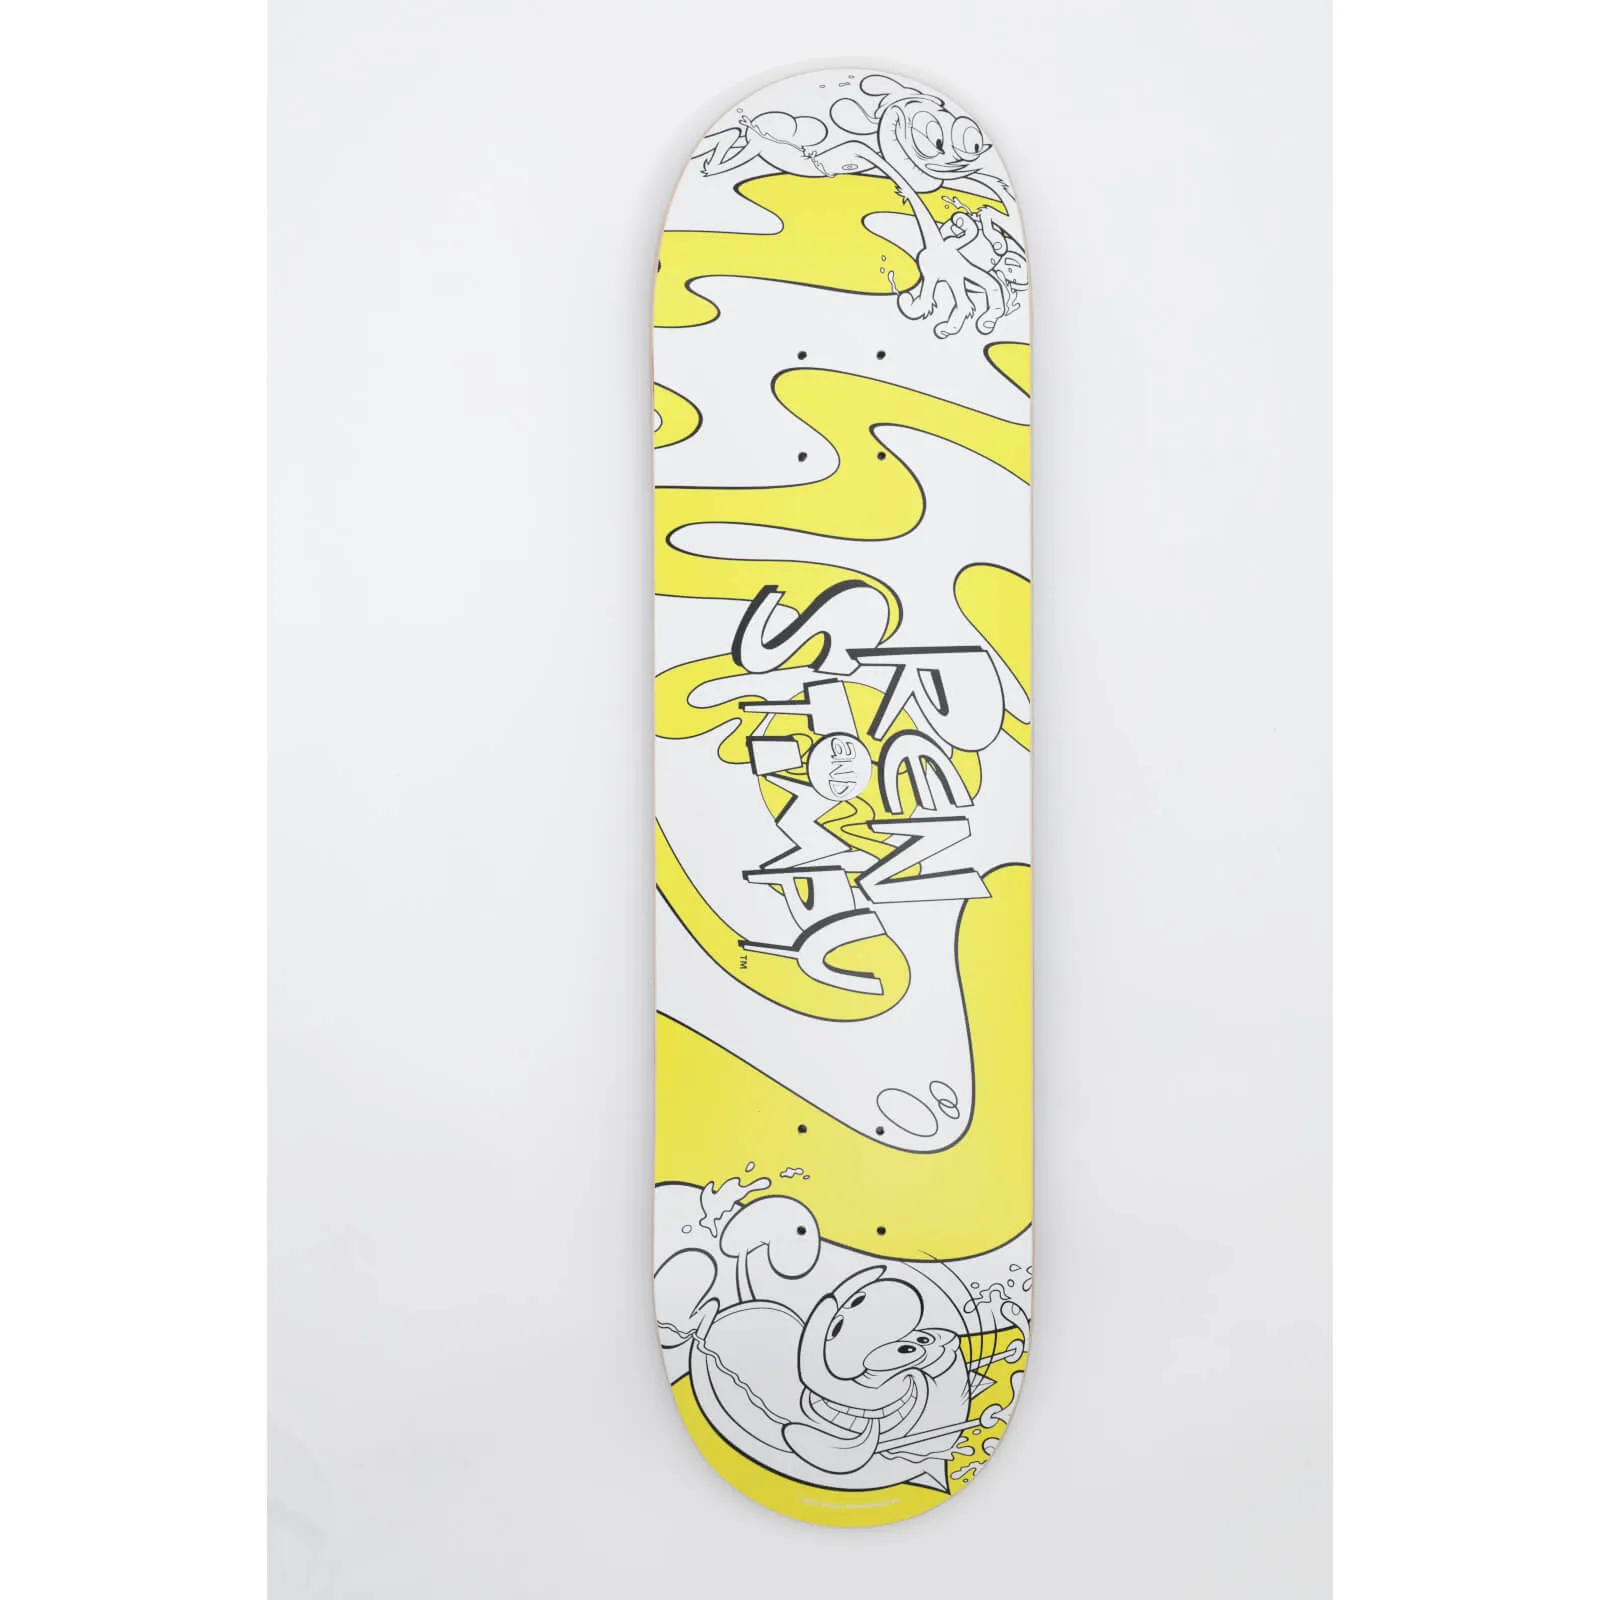 Ren and Stimpy  Exclusive Skateboard Deck - Limited to 500 pieces only